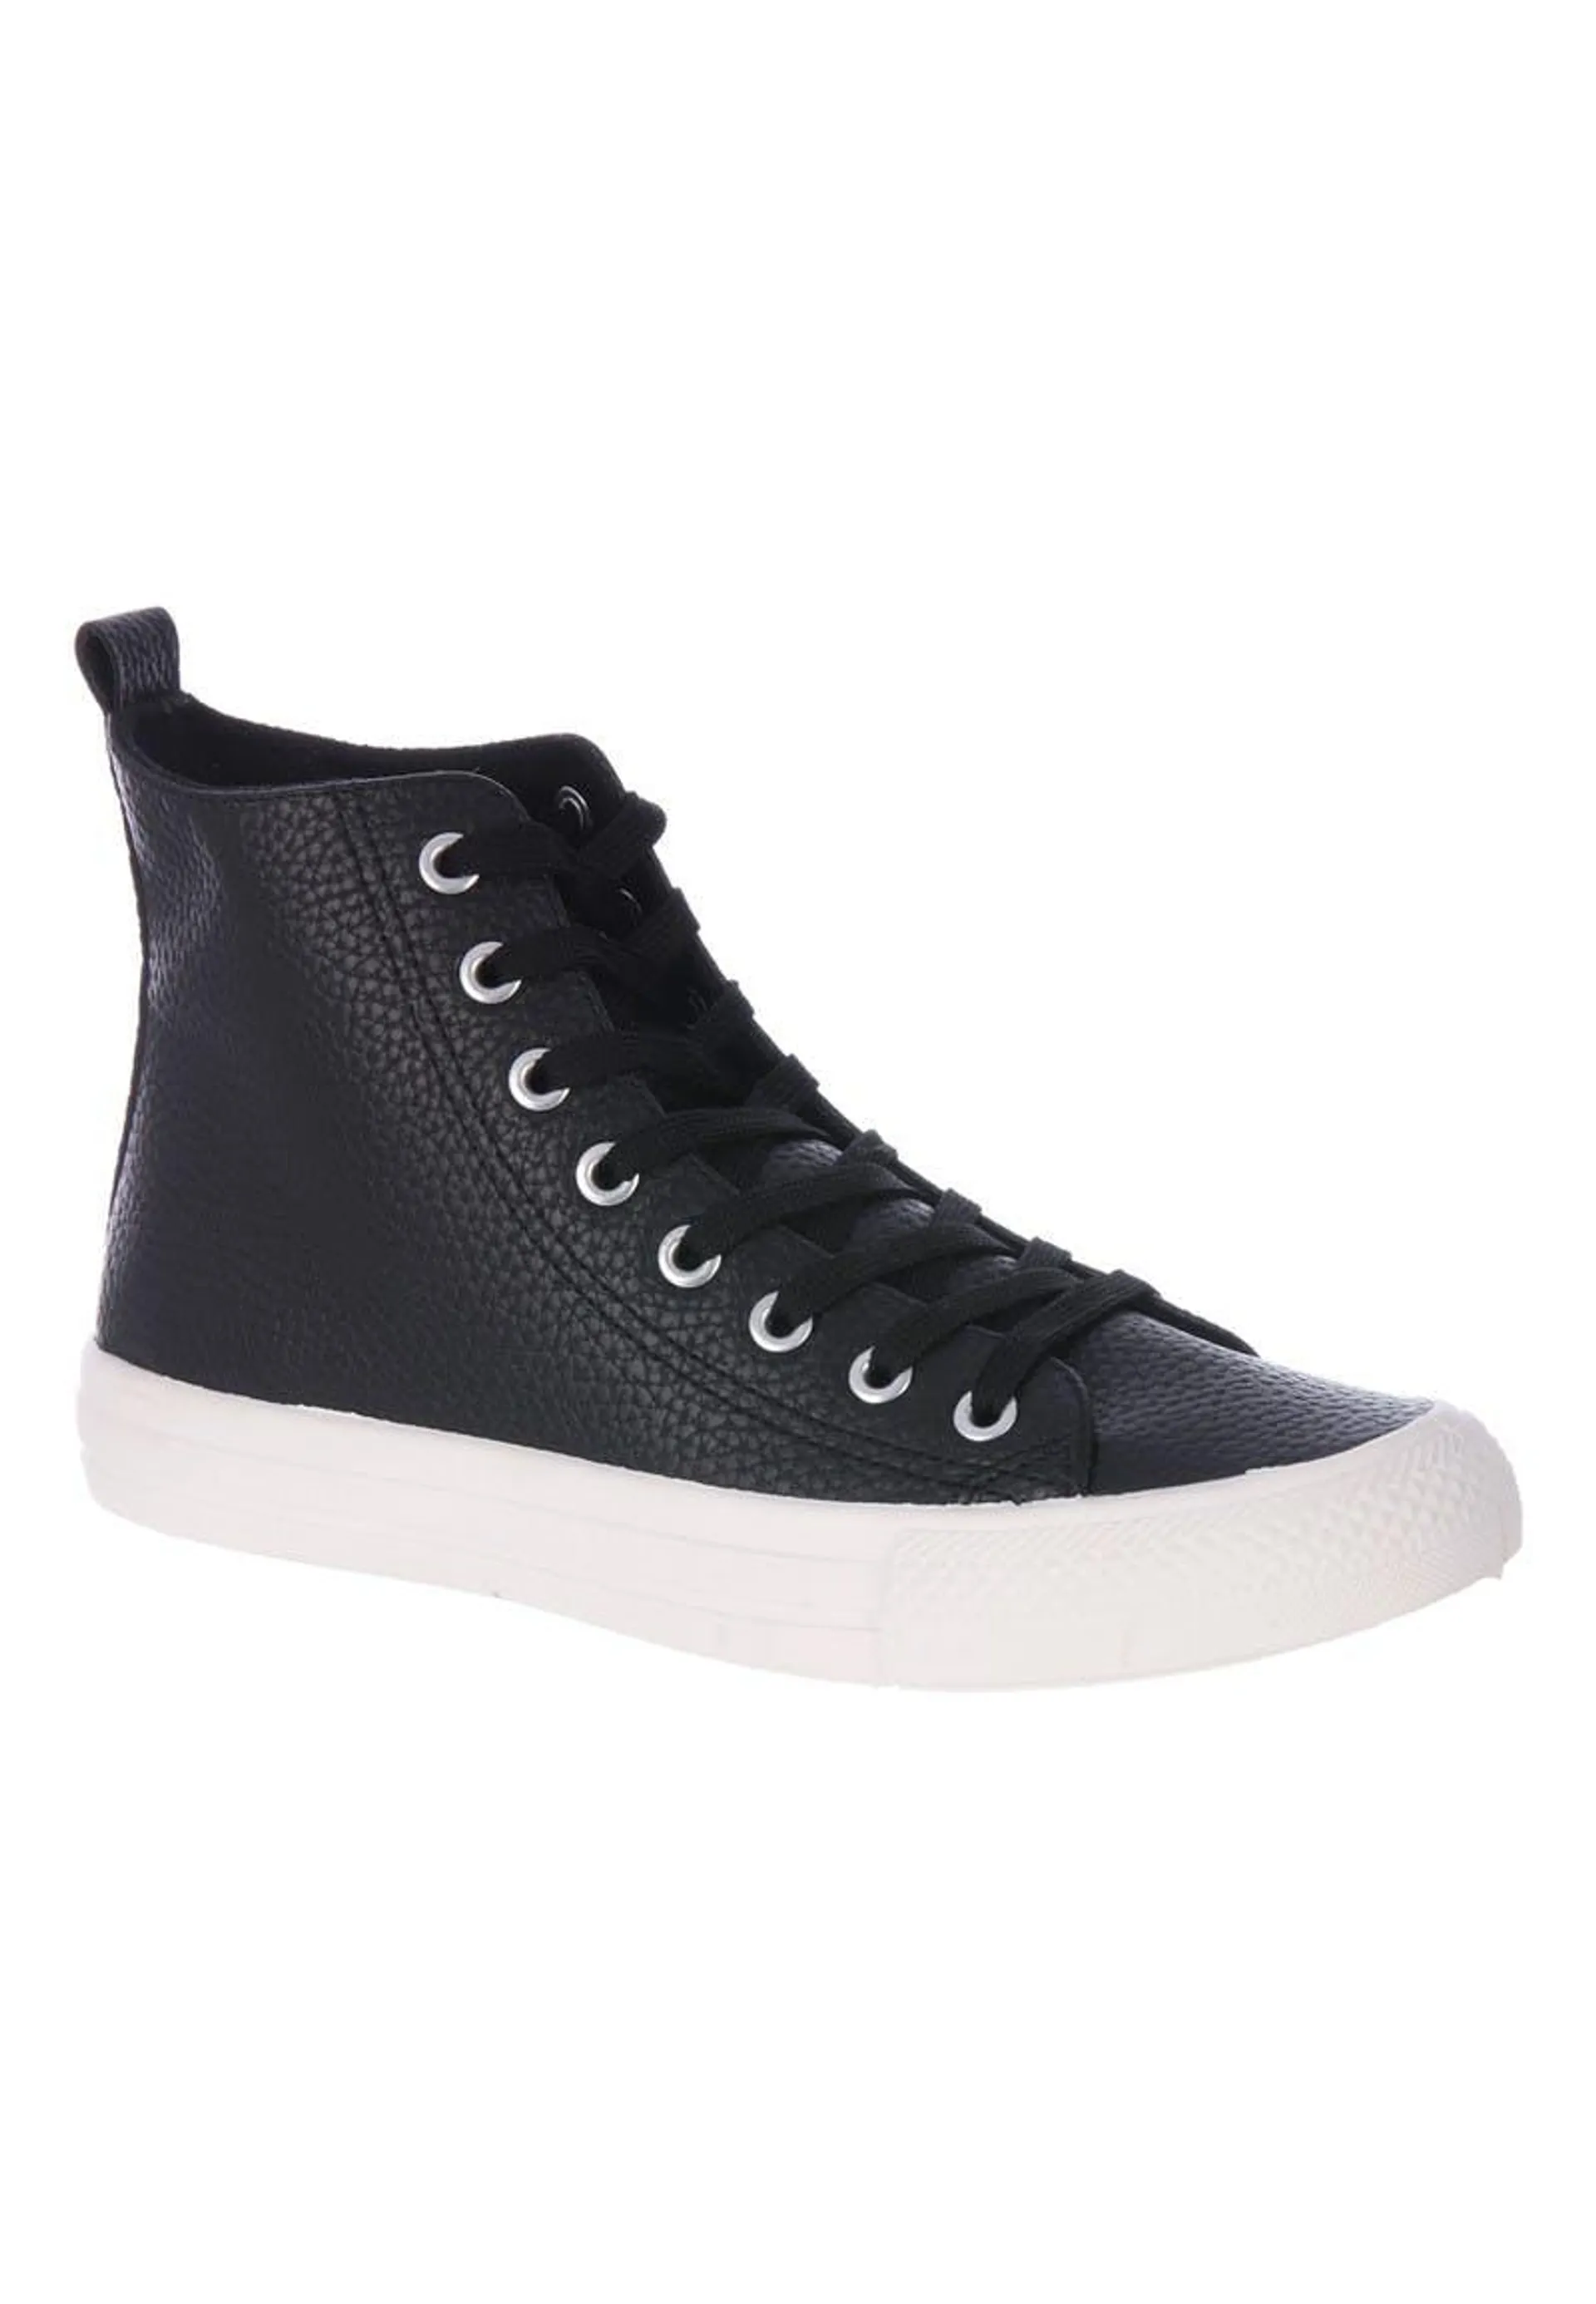 Womens Black Lace Up High-Top Trainers